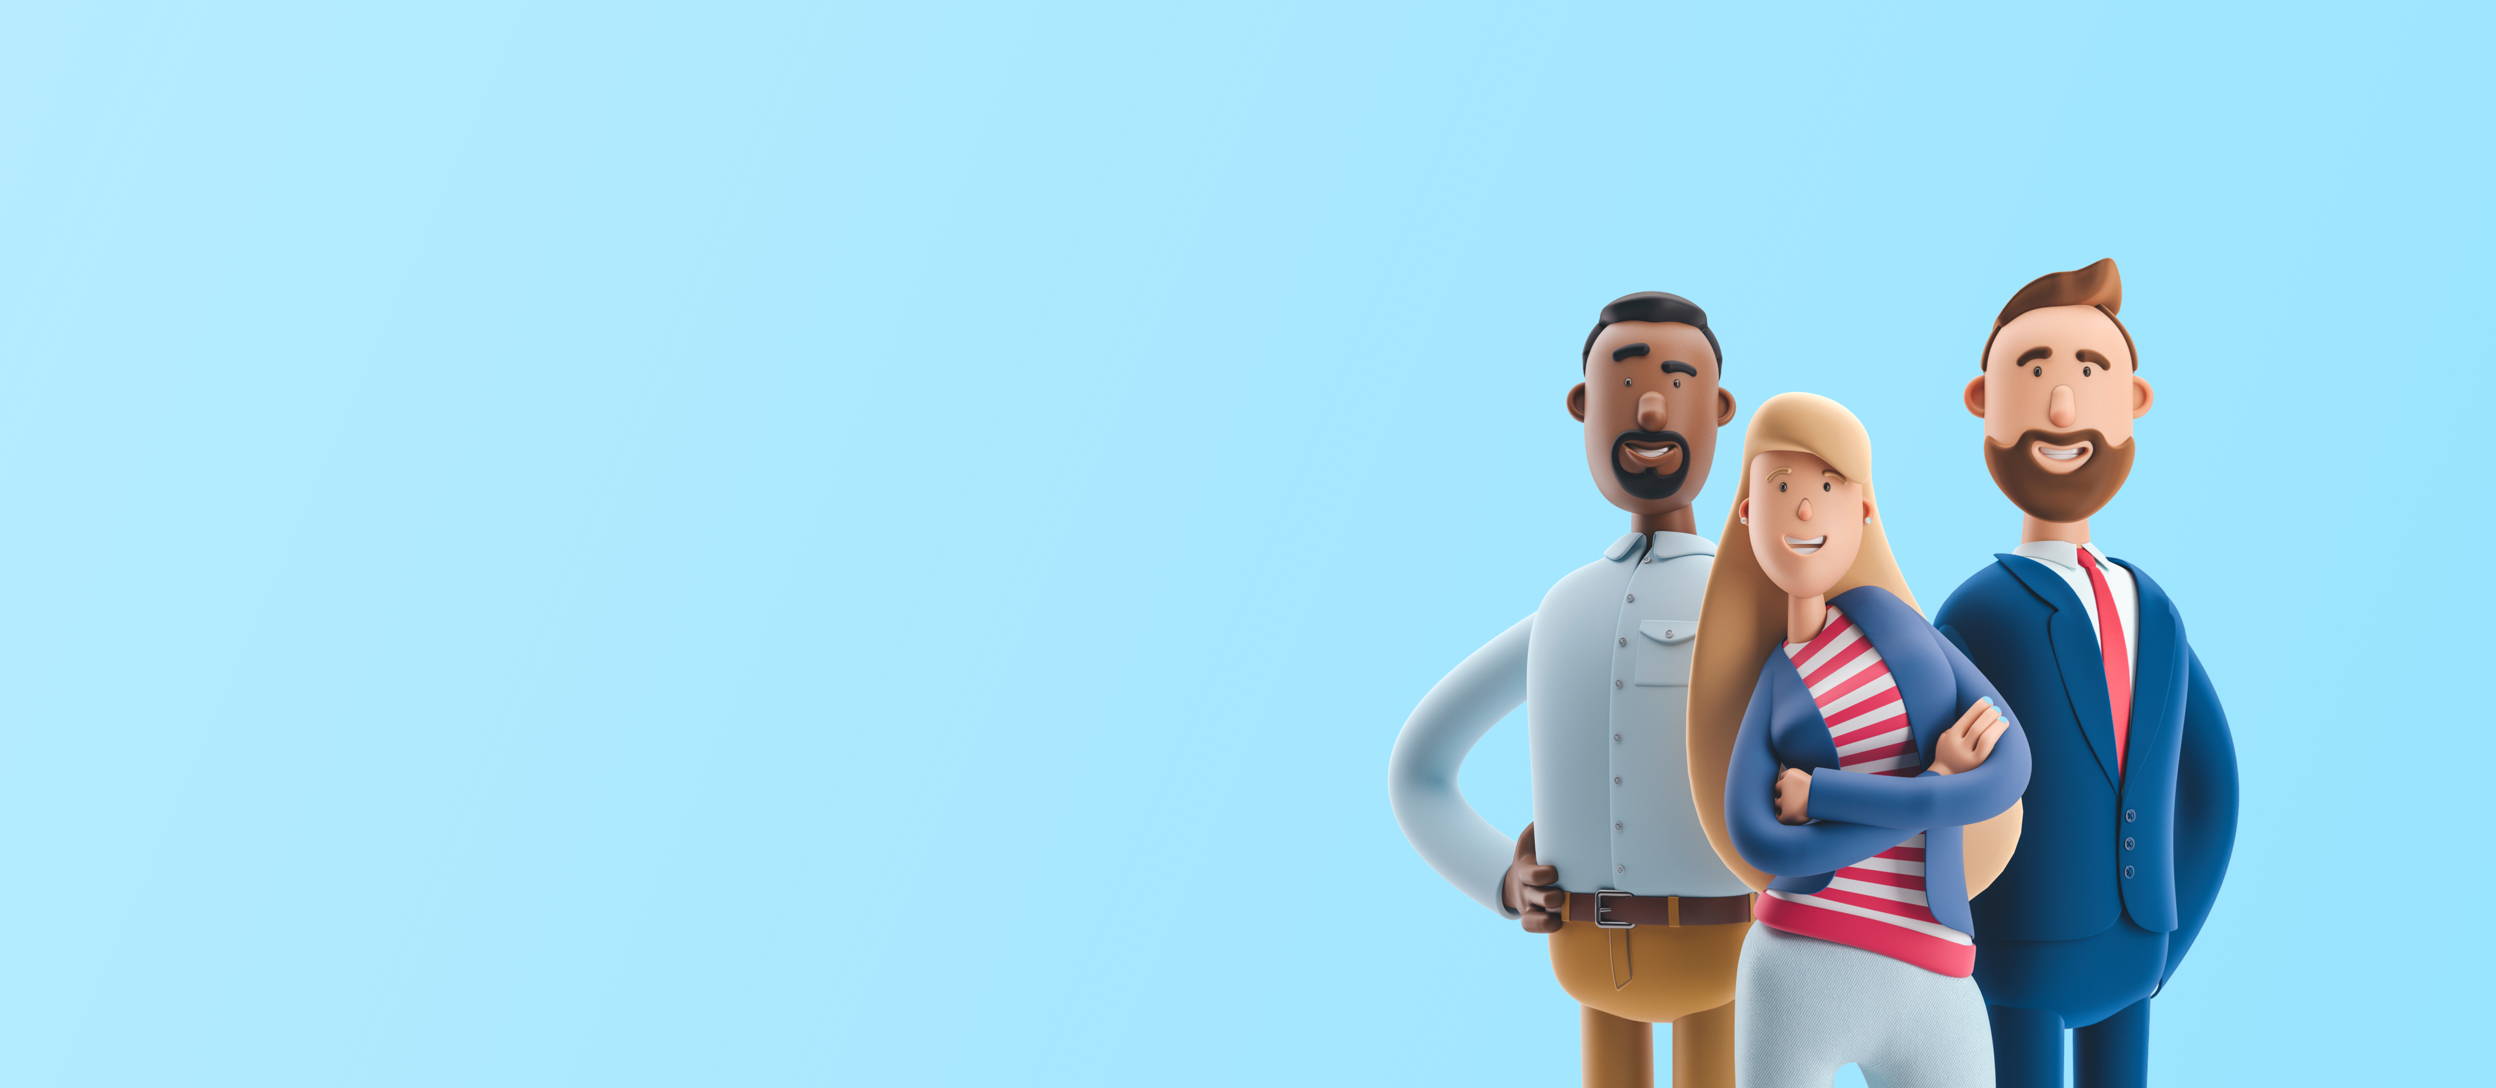 Three 3D cartoon employees smiling for Confetti's Virtual Family Feud Online Game with Teams